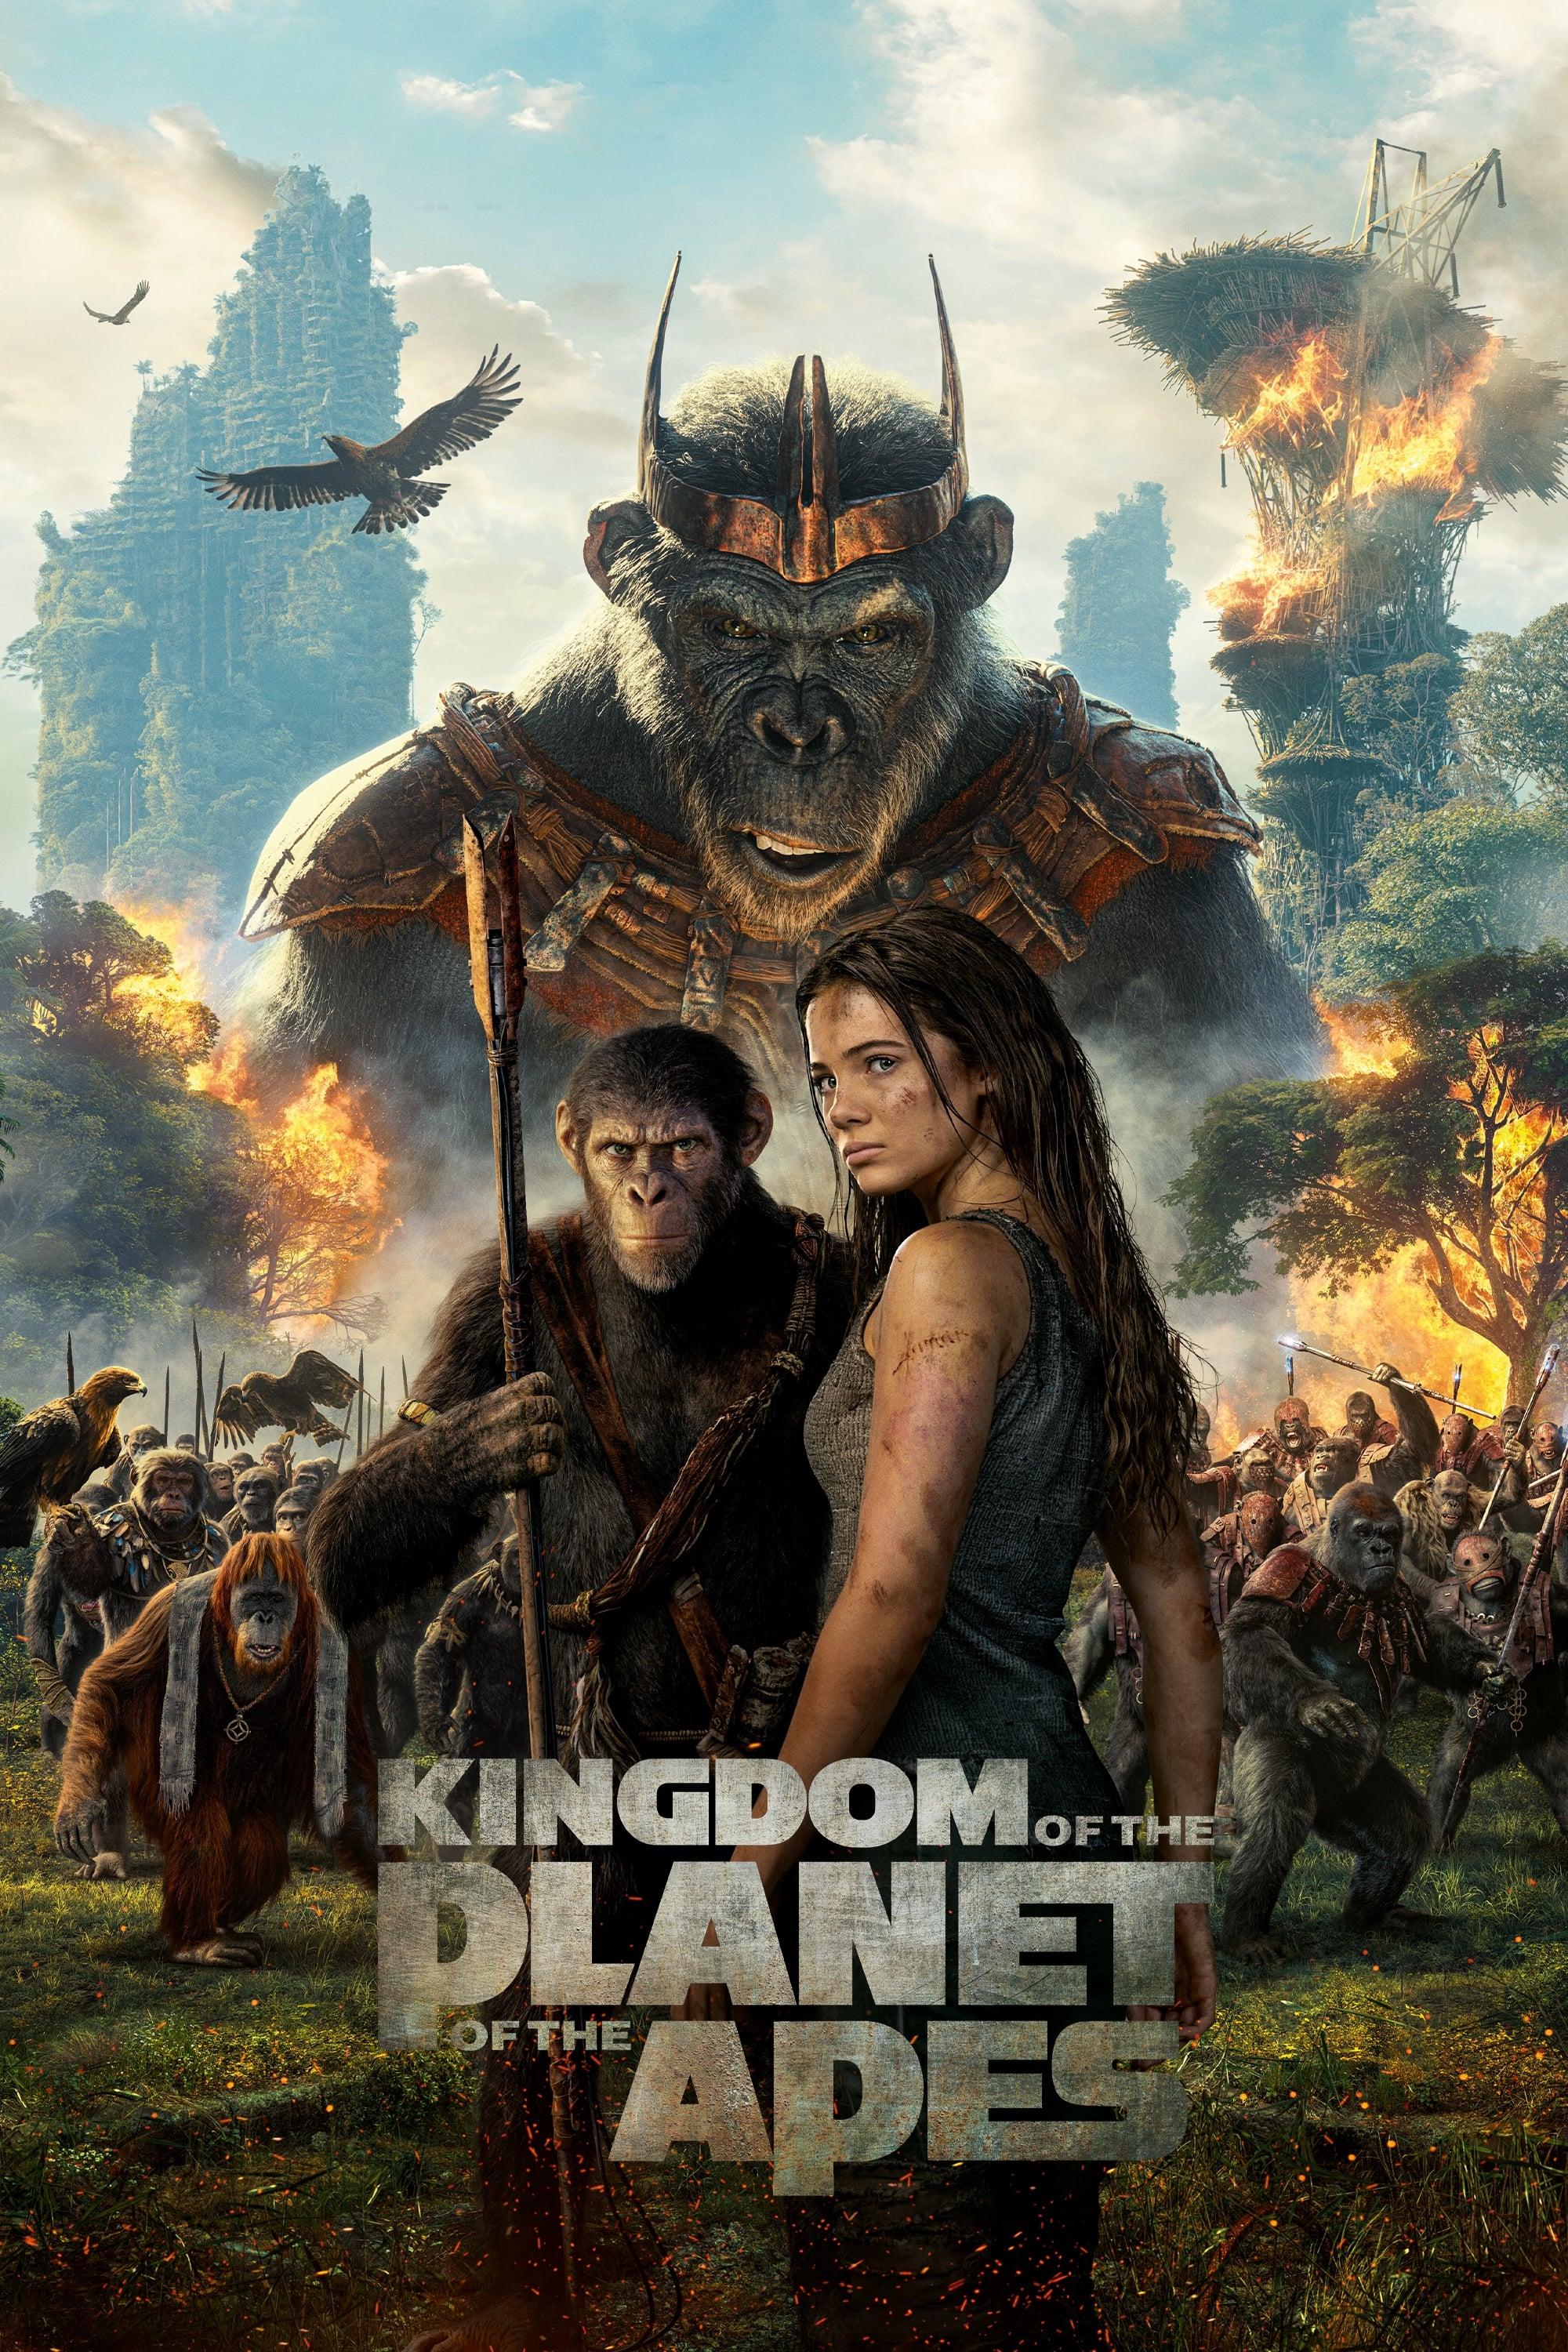 Movie poster of "Kingdom of the Planet of the Apes"